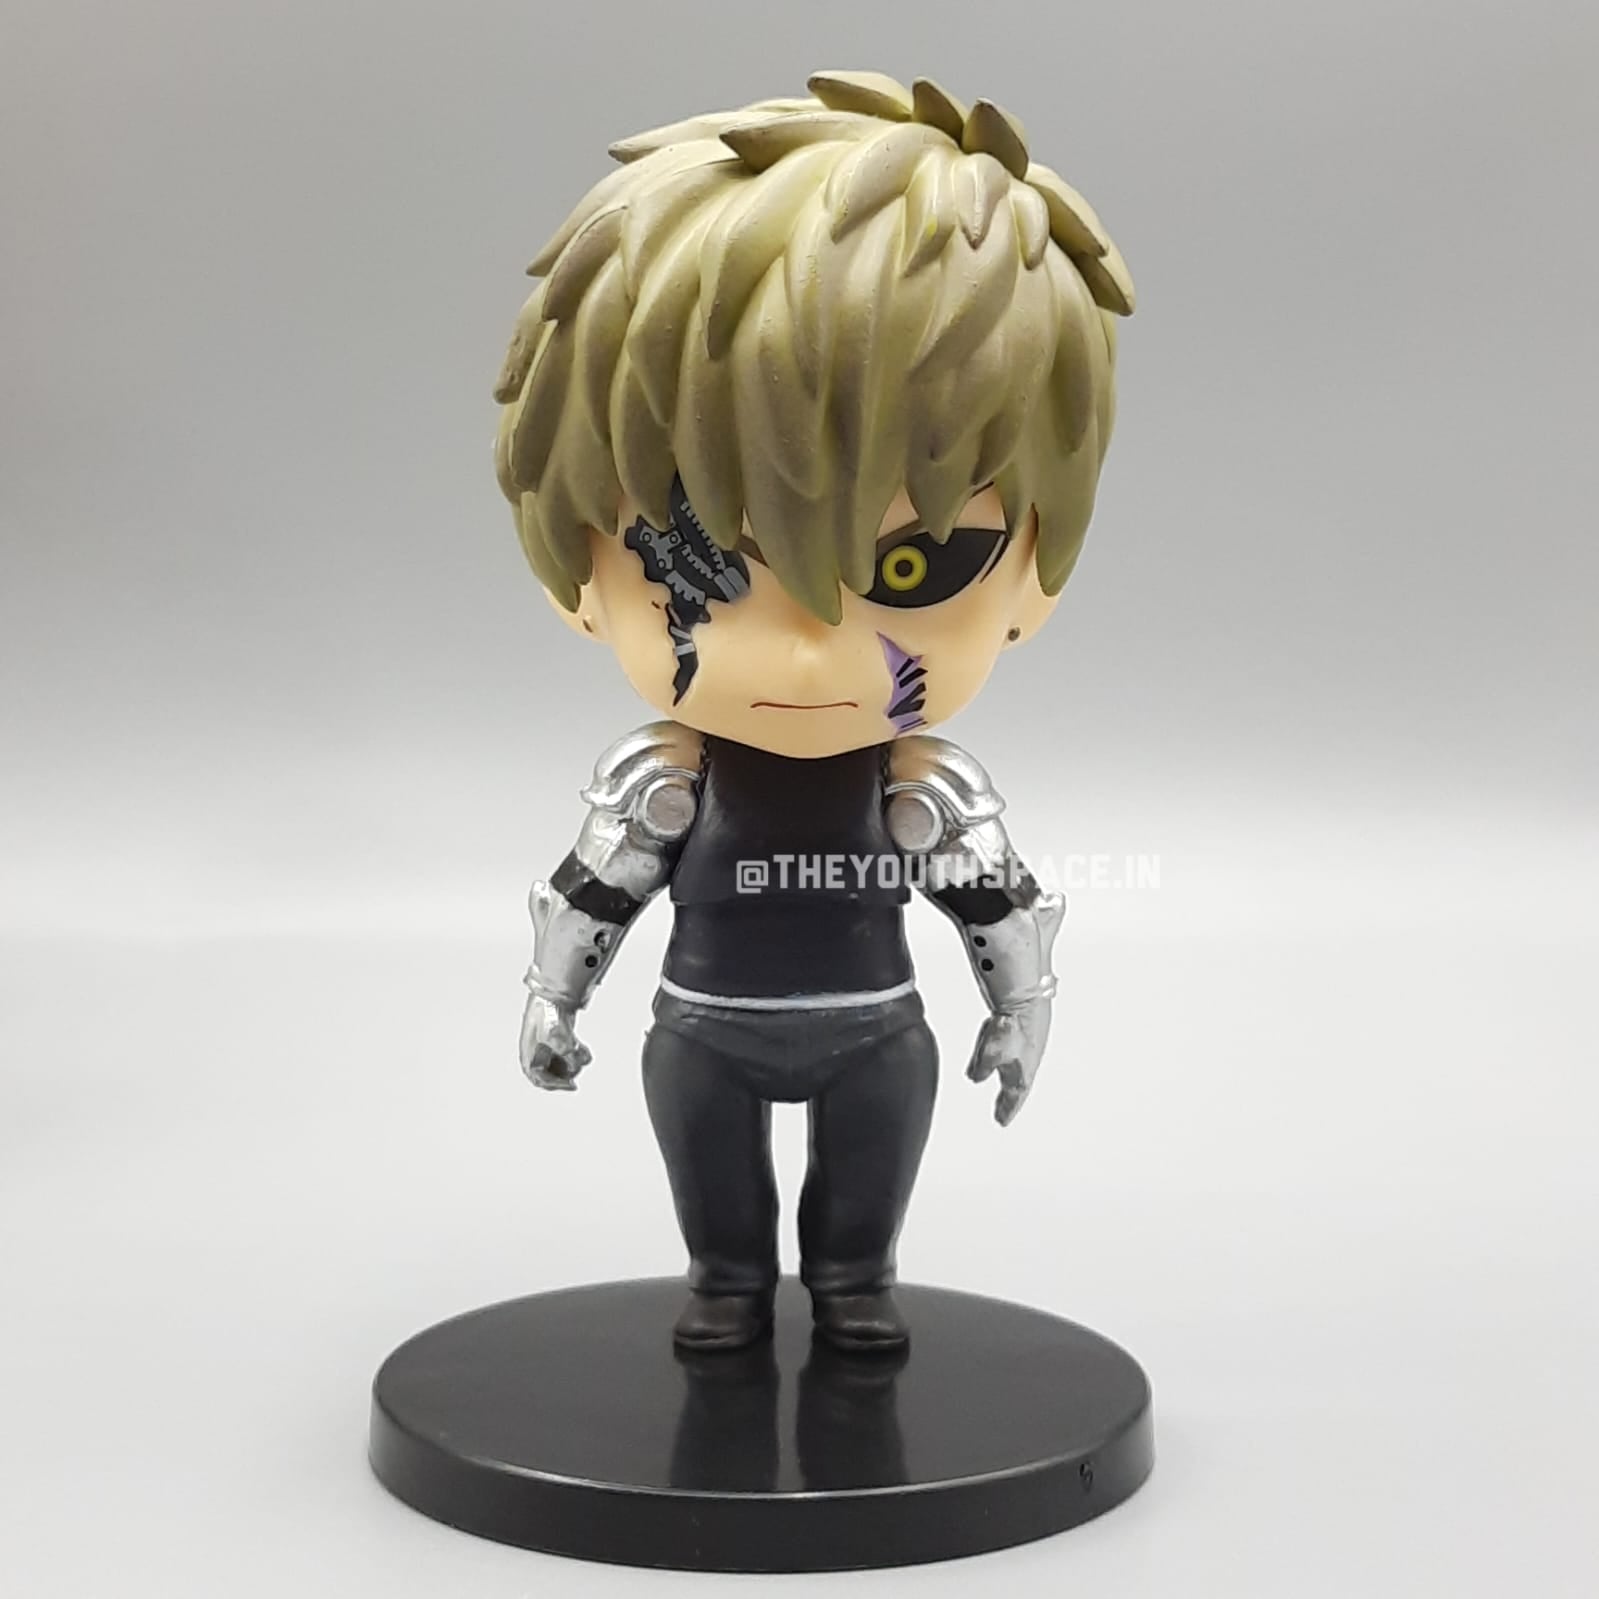 One punch man figurines in set of 5